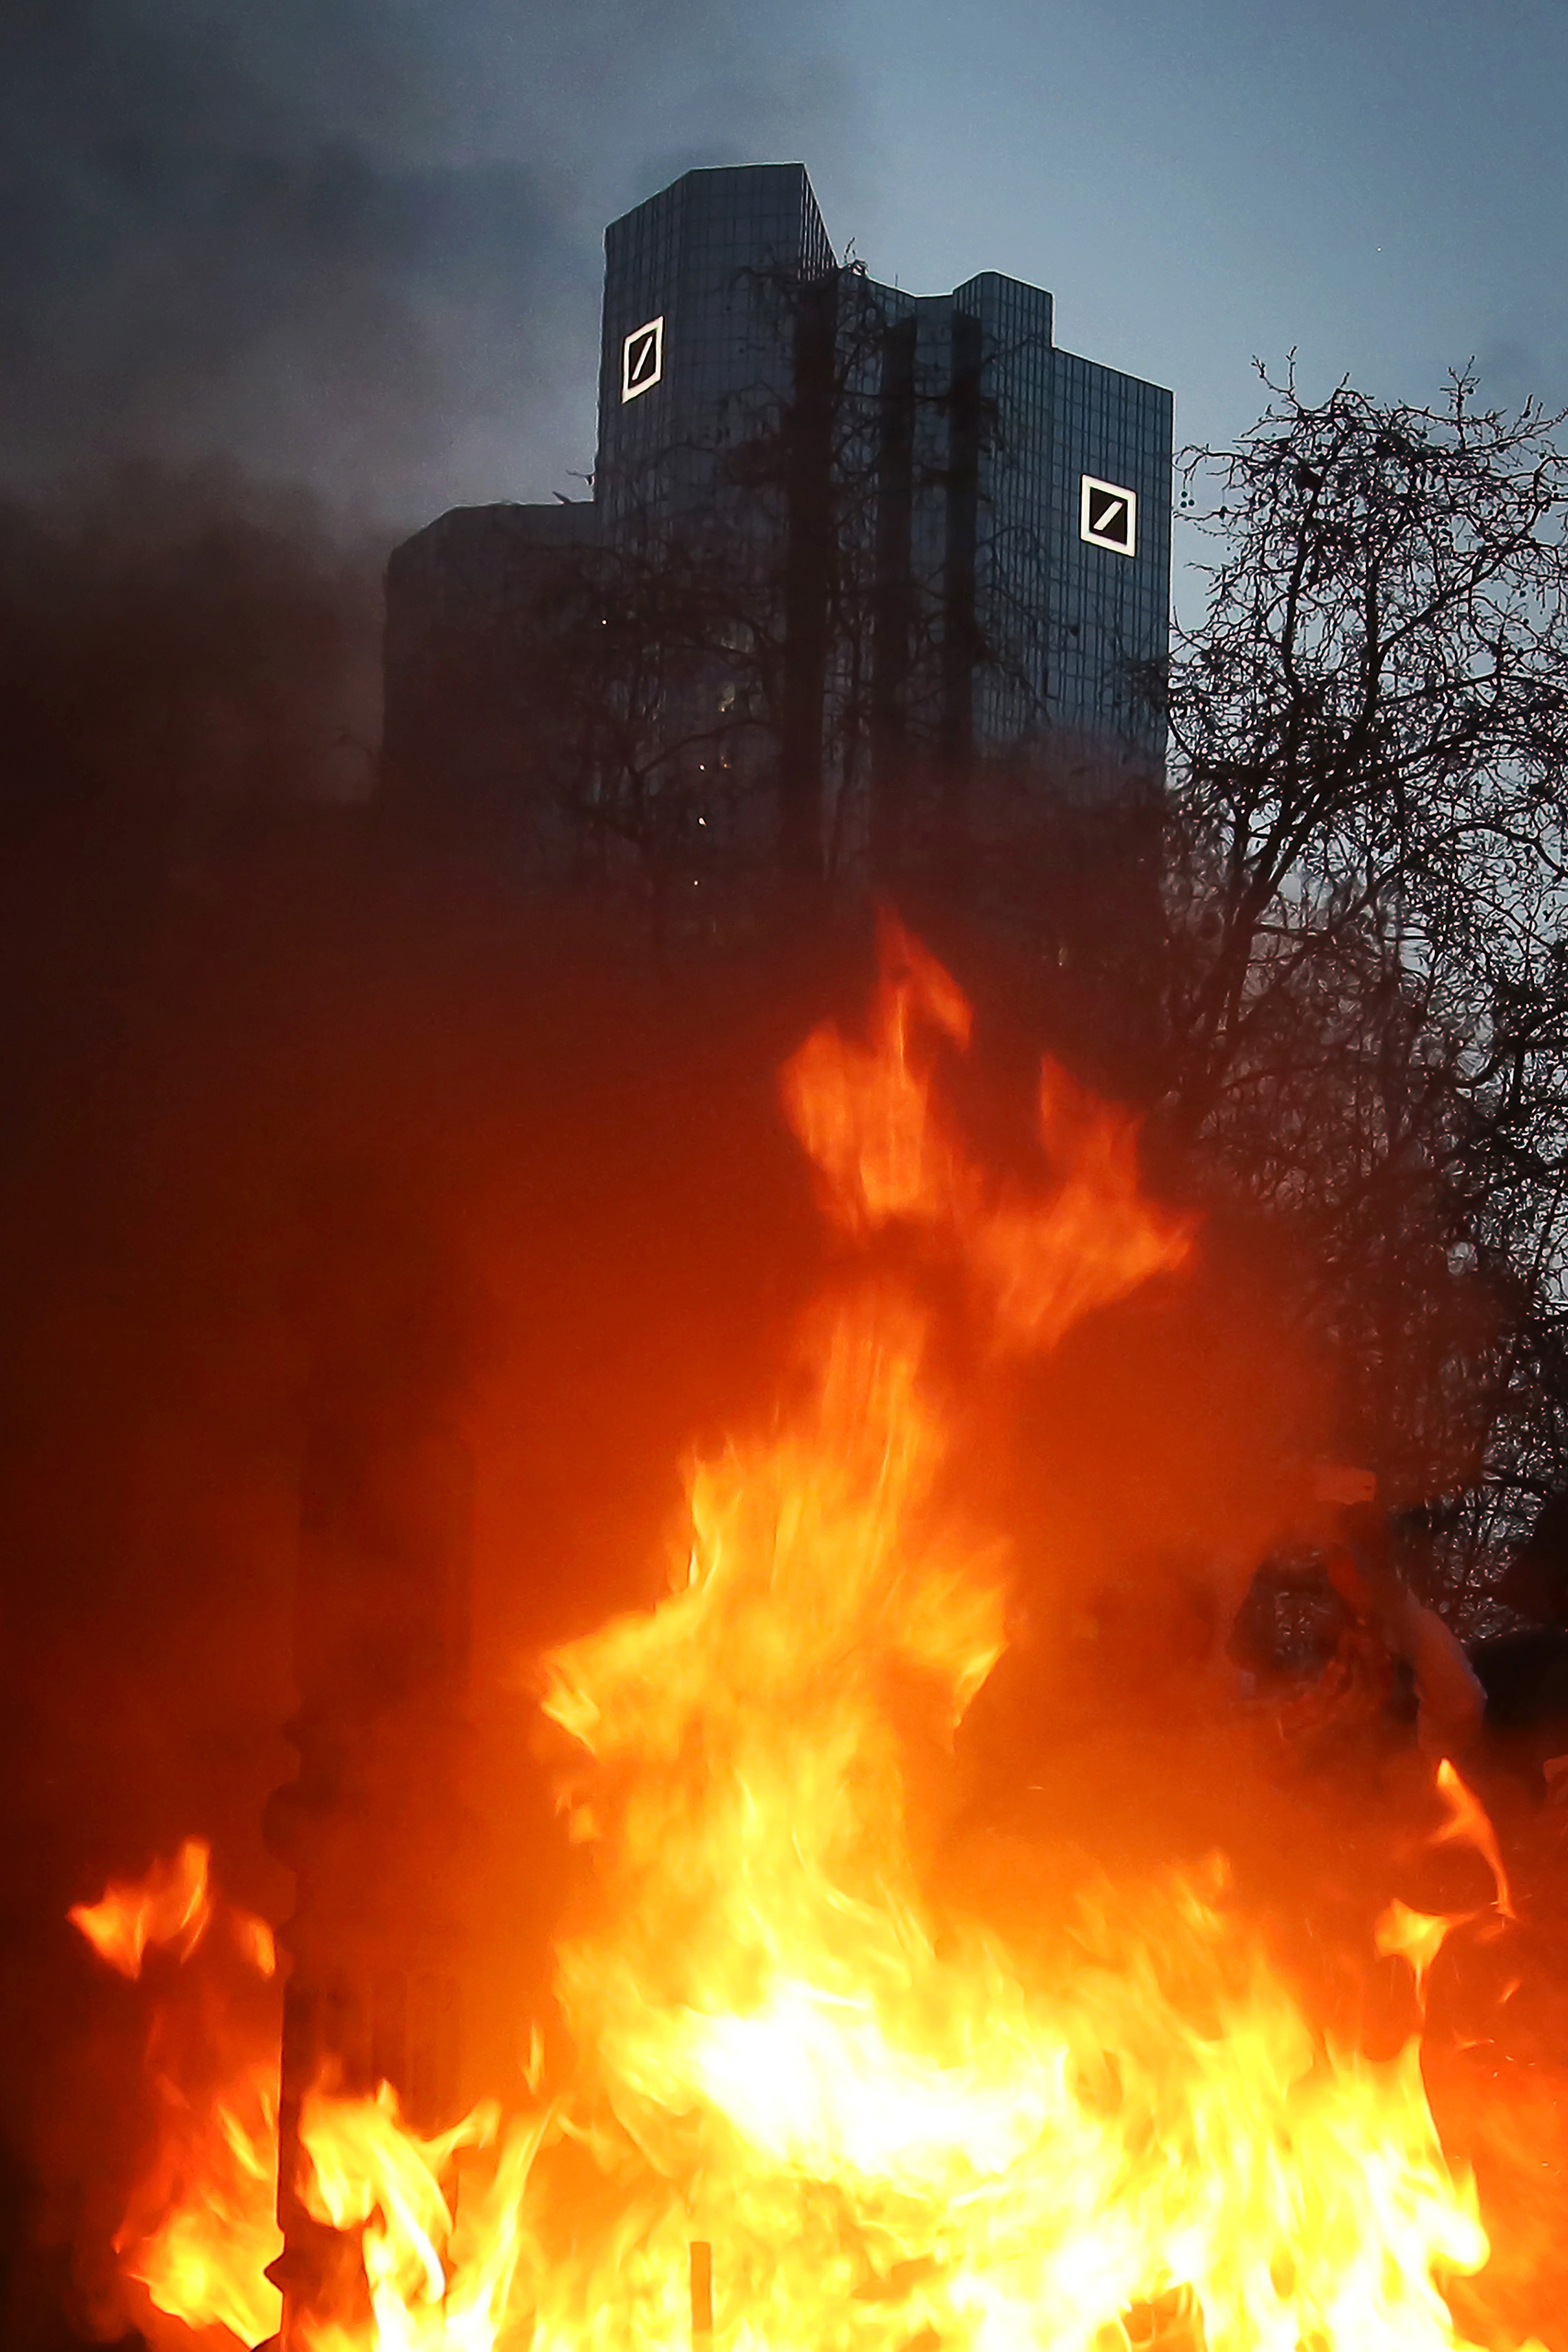 Anti-austerity protesters started the fire, burning fake money in the shadow of the Deutsche Bank towers in Frankfurt in March 2015